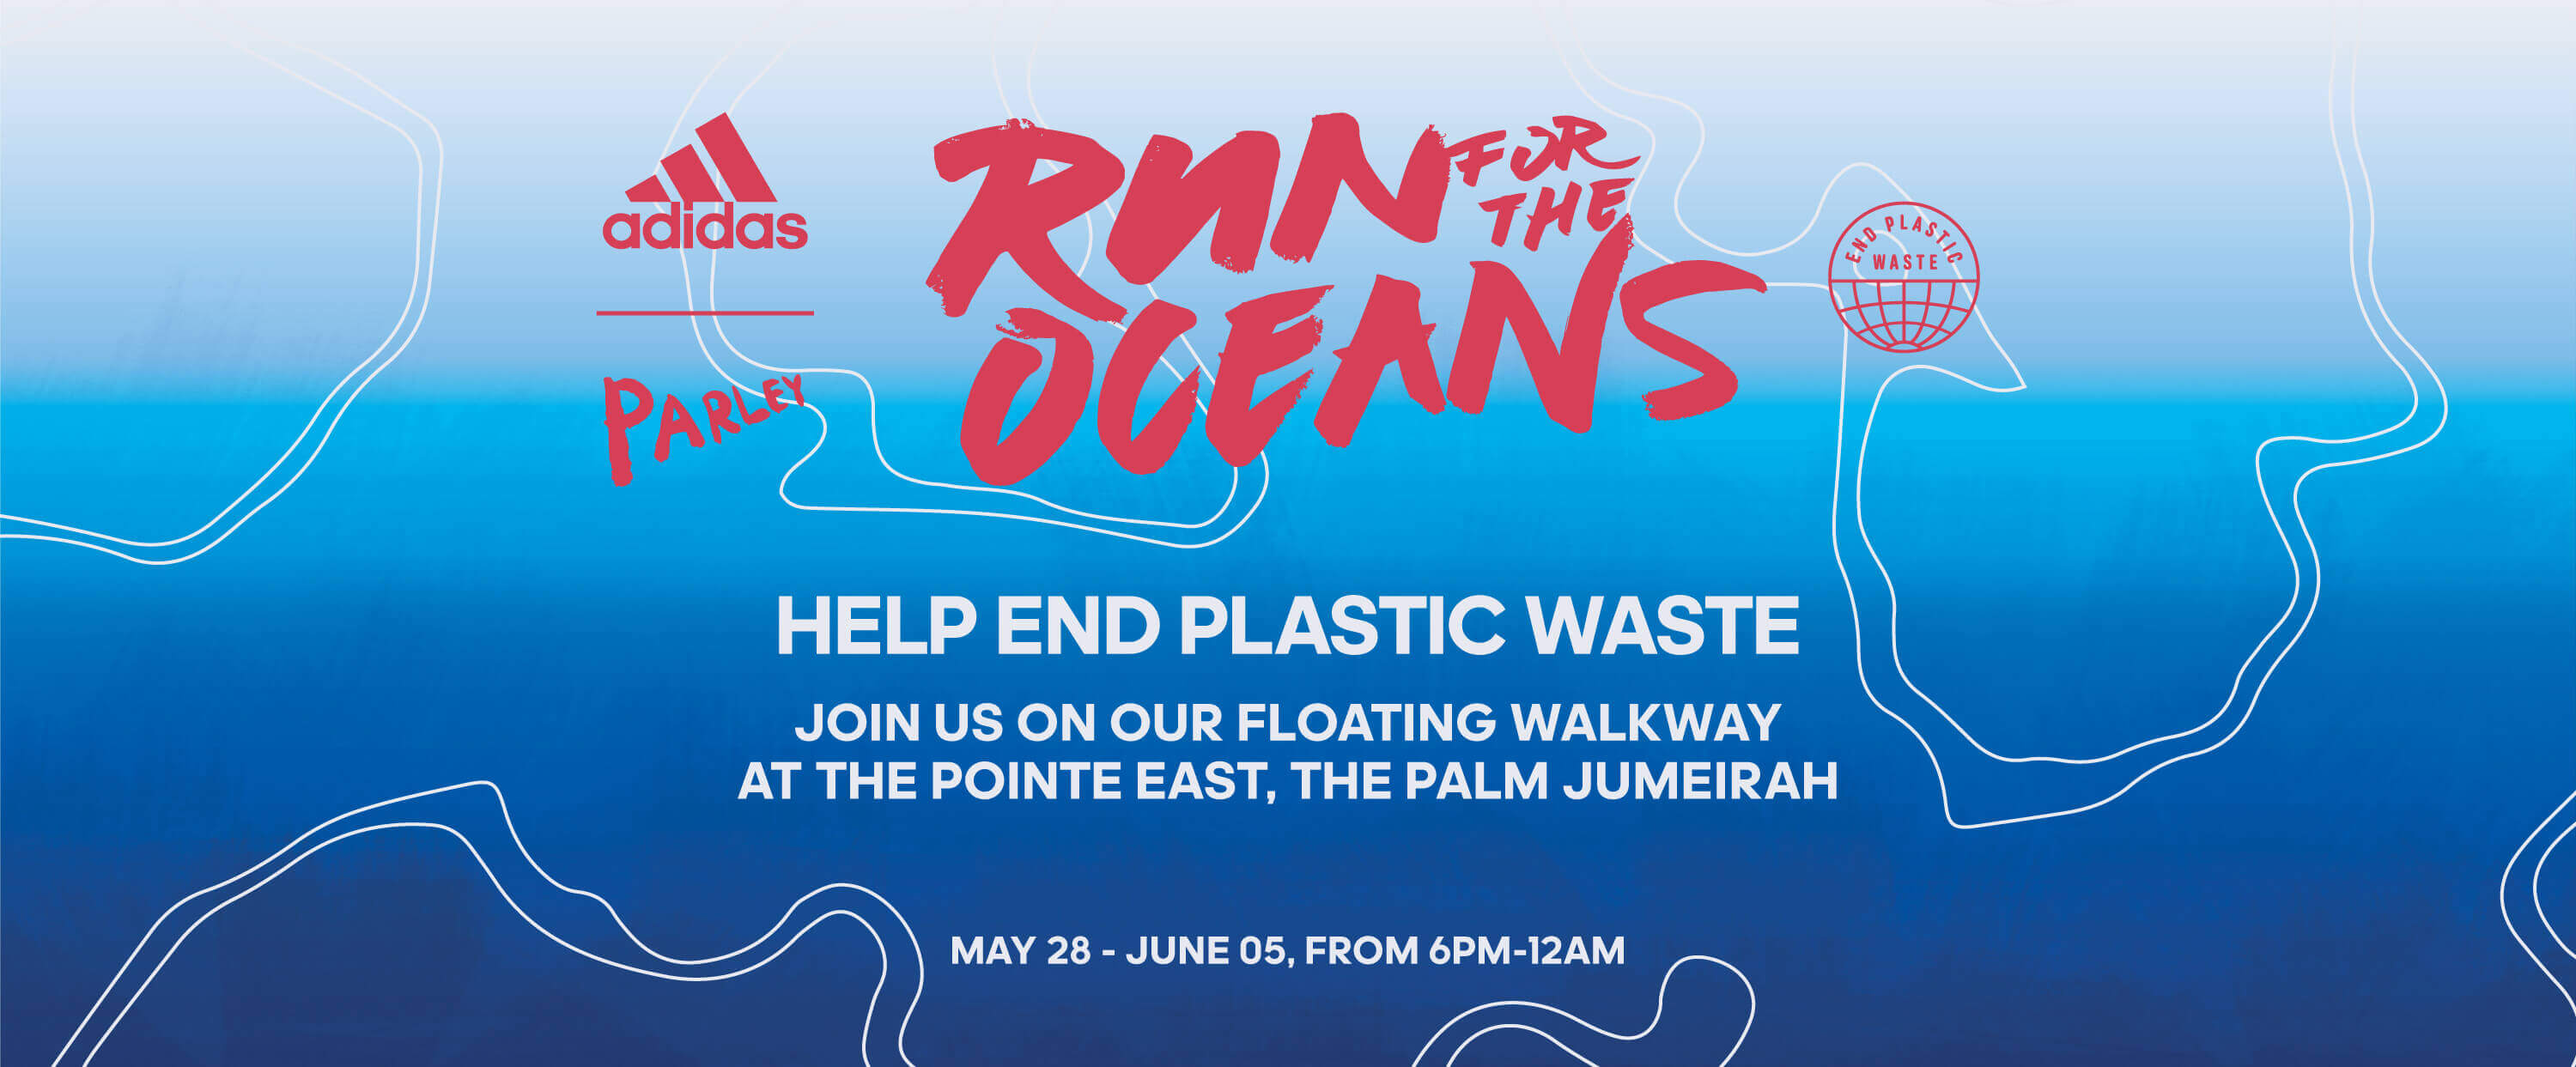 GET READY TO RUN FOR THE OCEANS AT THE POINTE, PALM JUMEIRAH